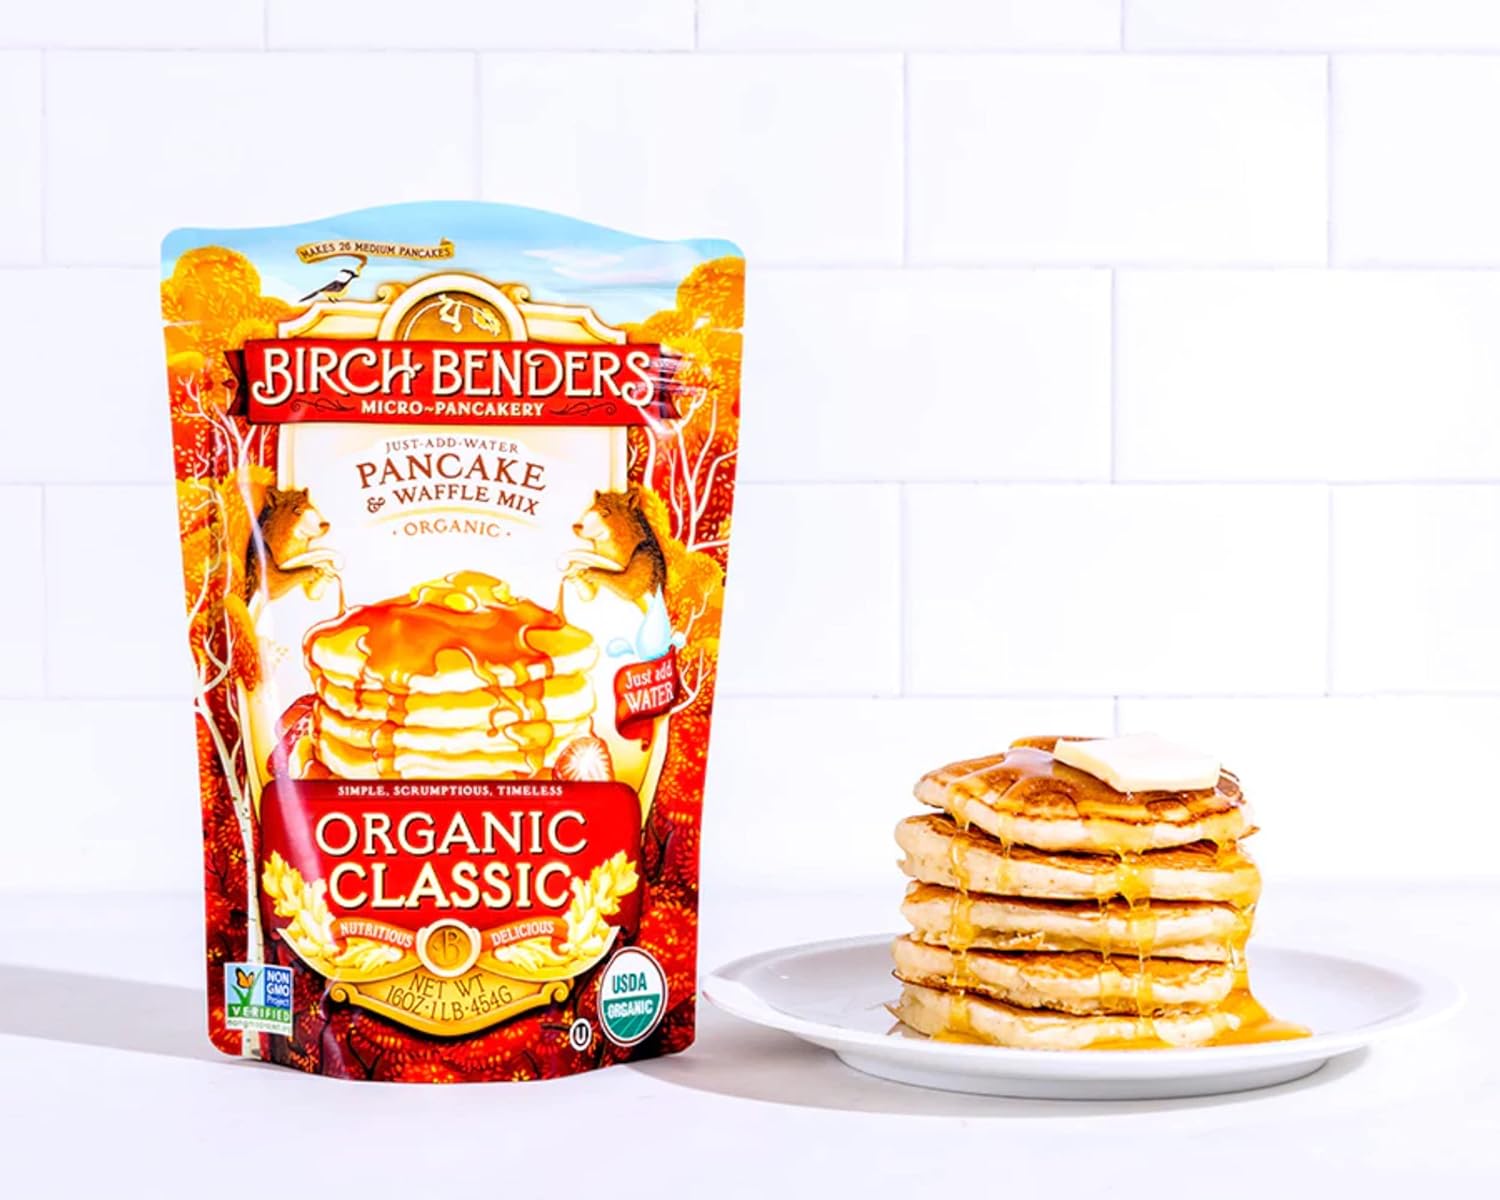 Birch Benders Organic Classic Pancake and Waffle Mix, Non-GMO, Just Add Water, 16 oz (Pack of 6) : Grocery & Gourmet Food